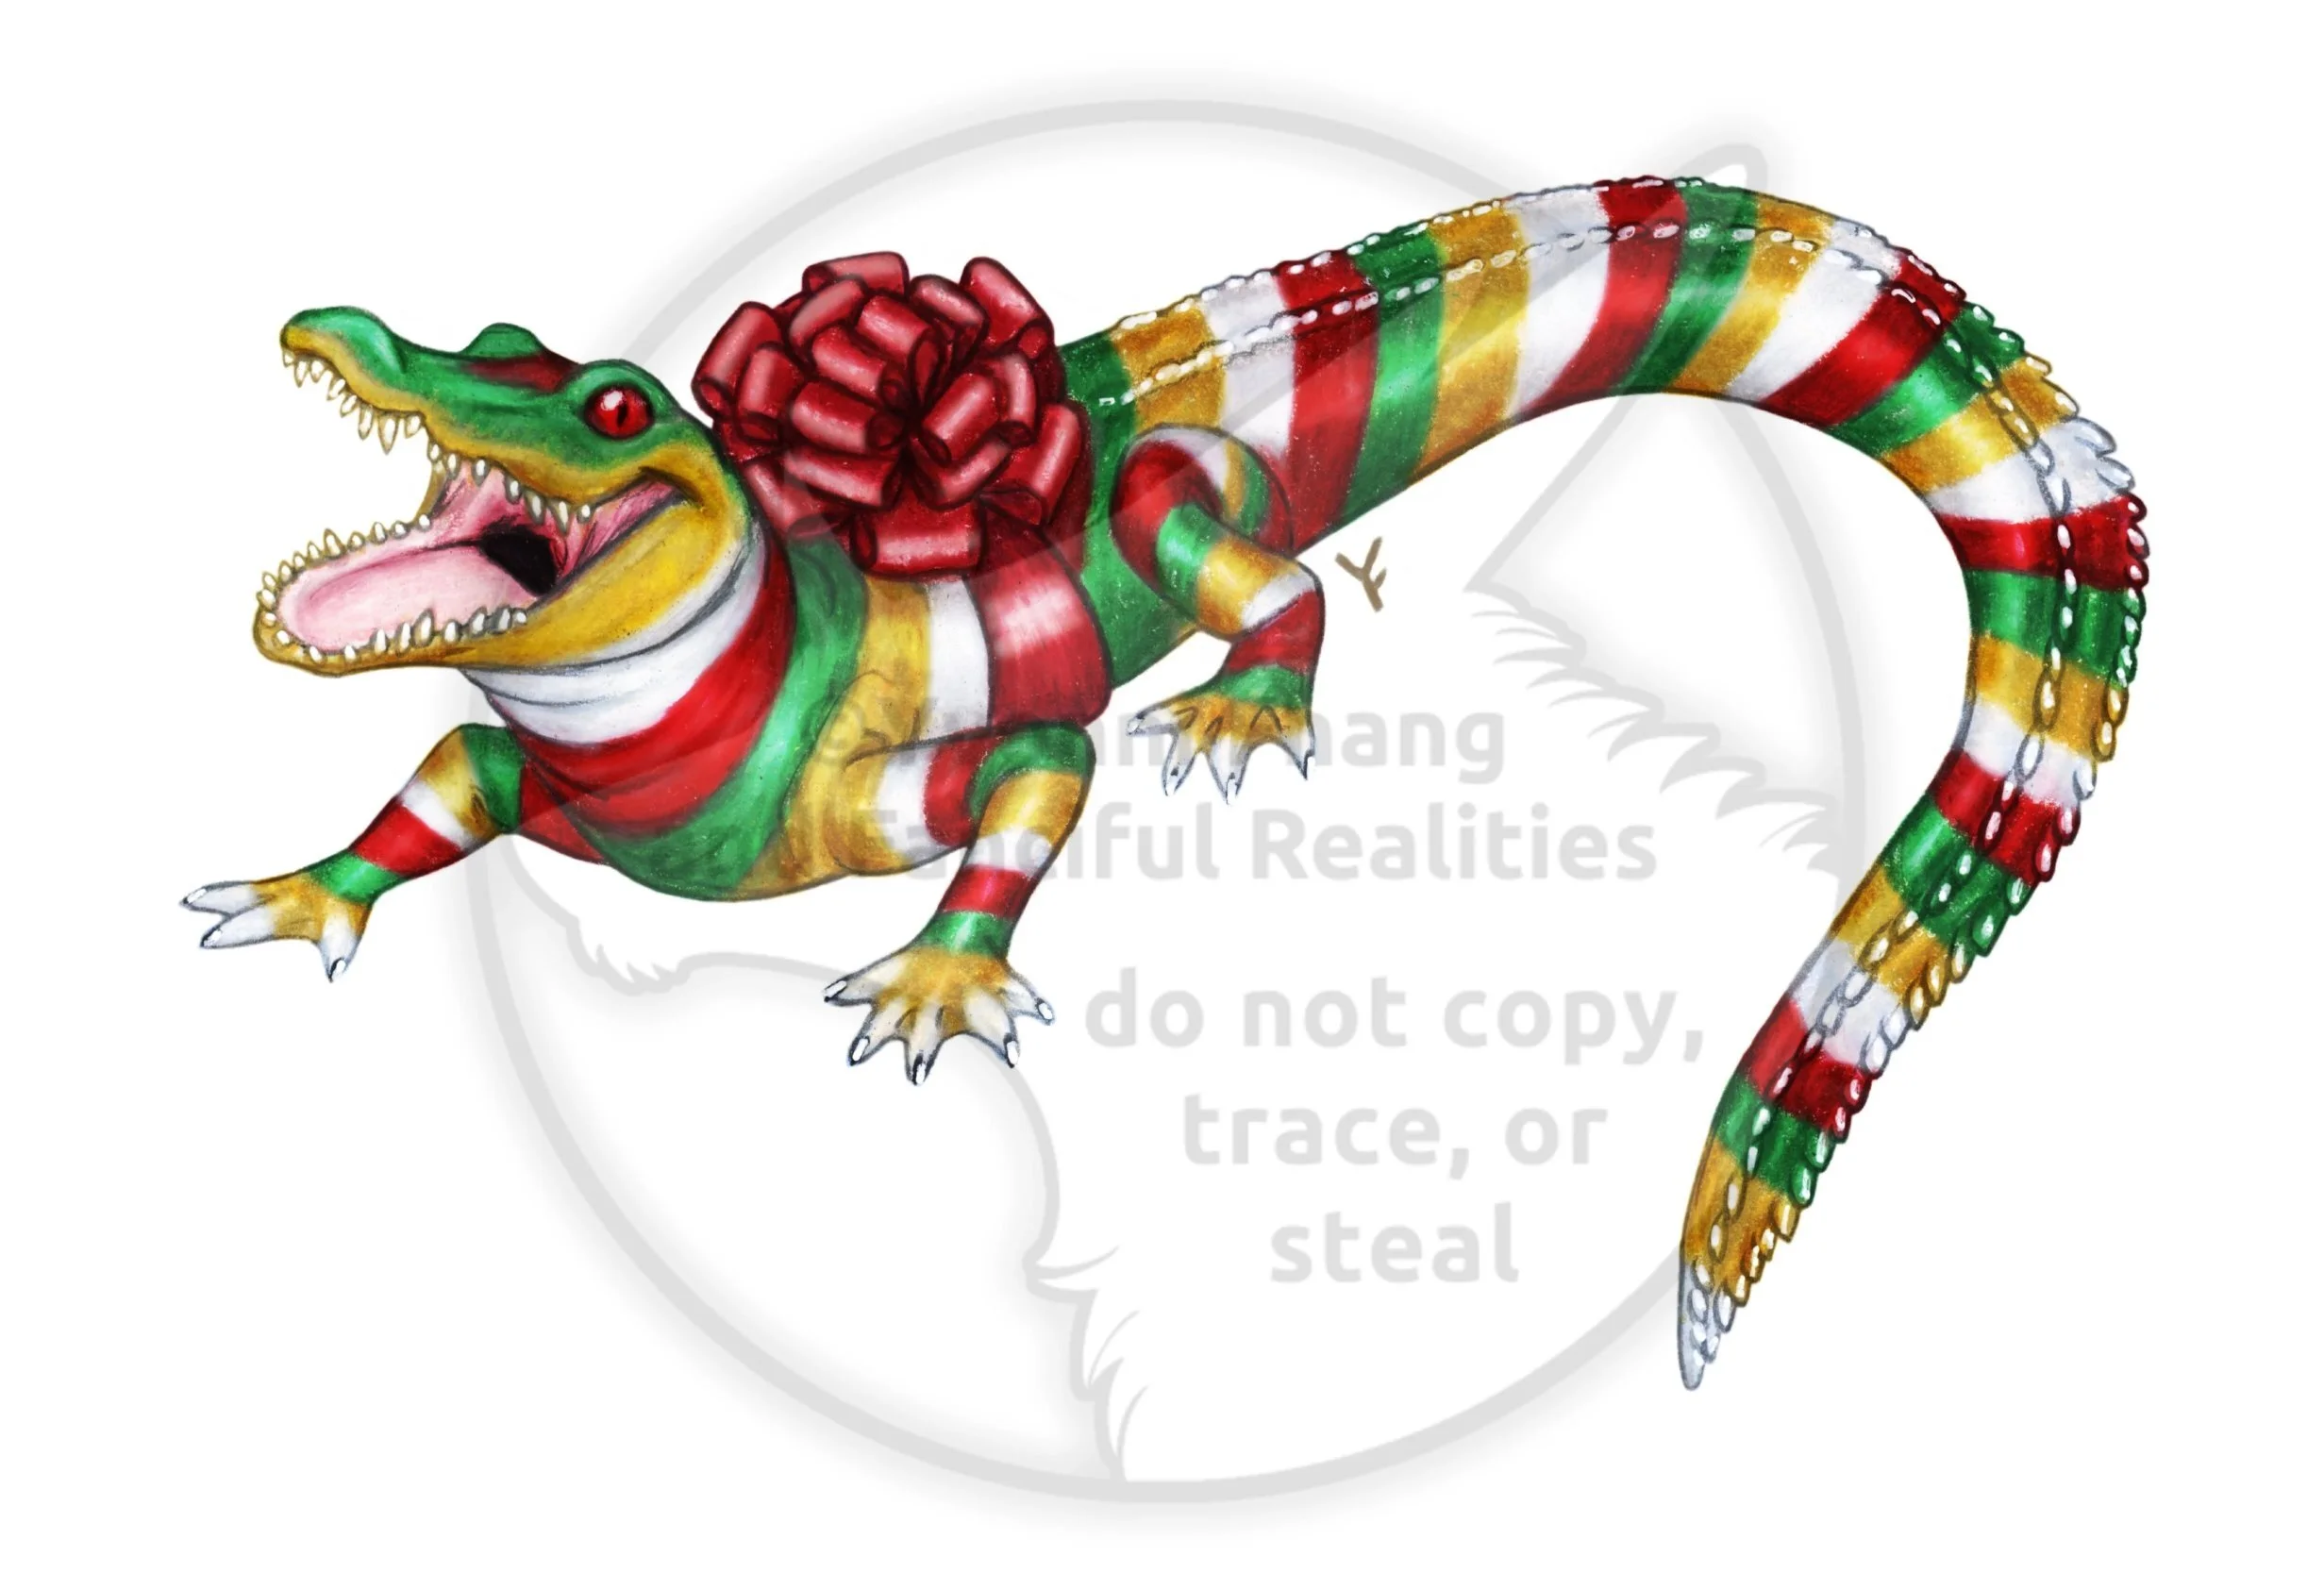 A festively wrapped Christmas alligator in a big red holiday bow!